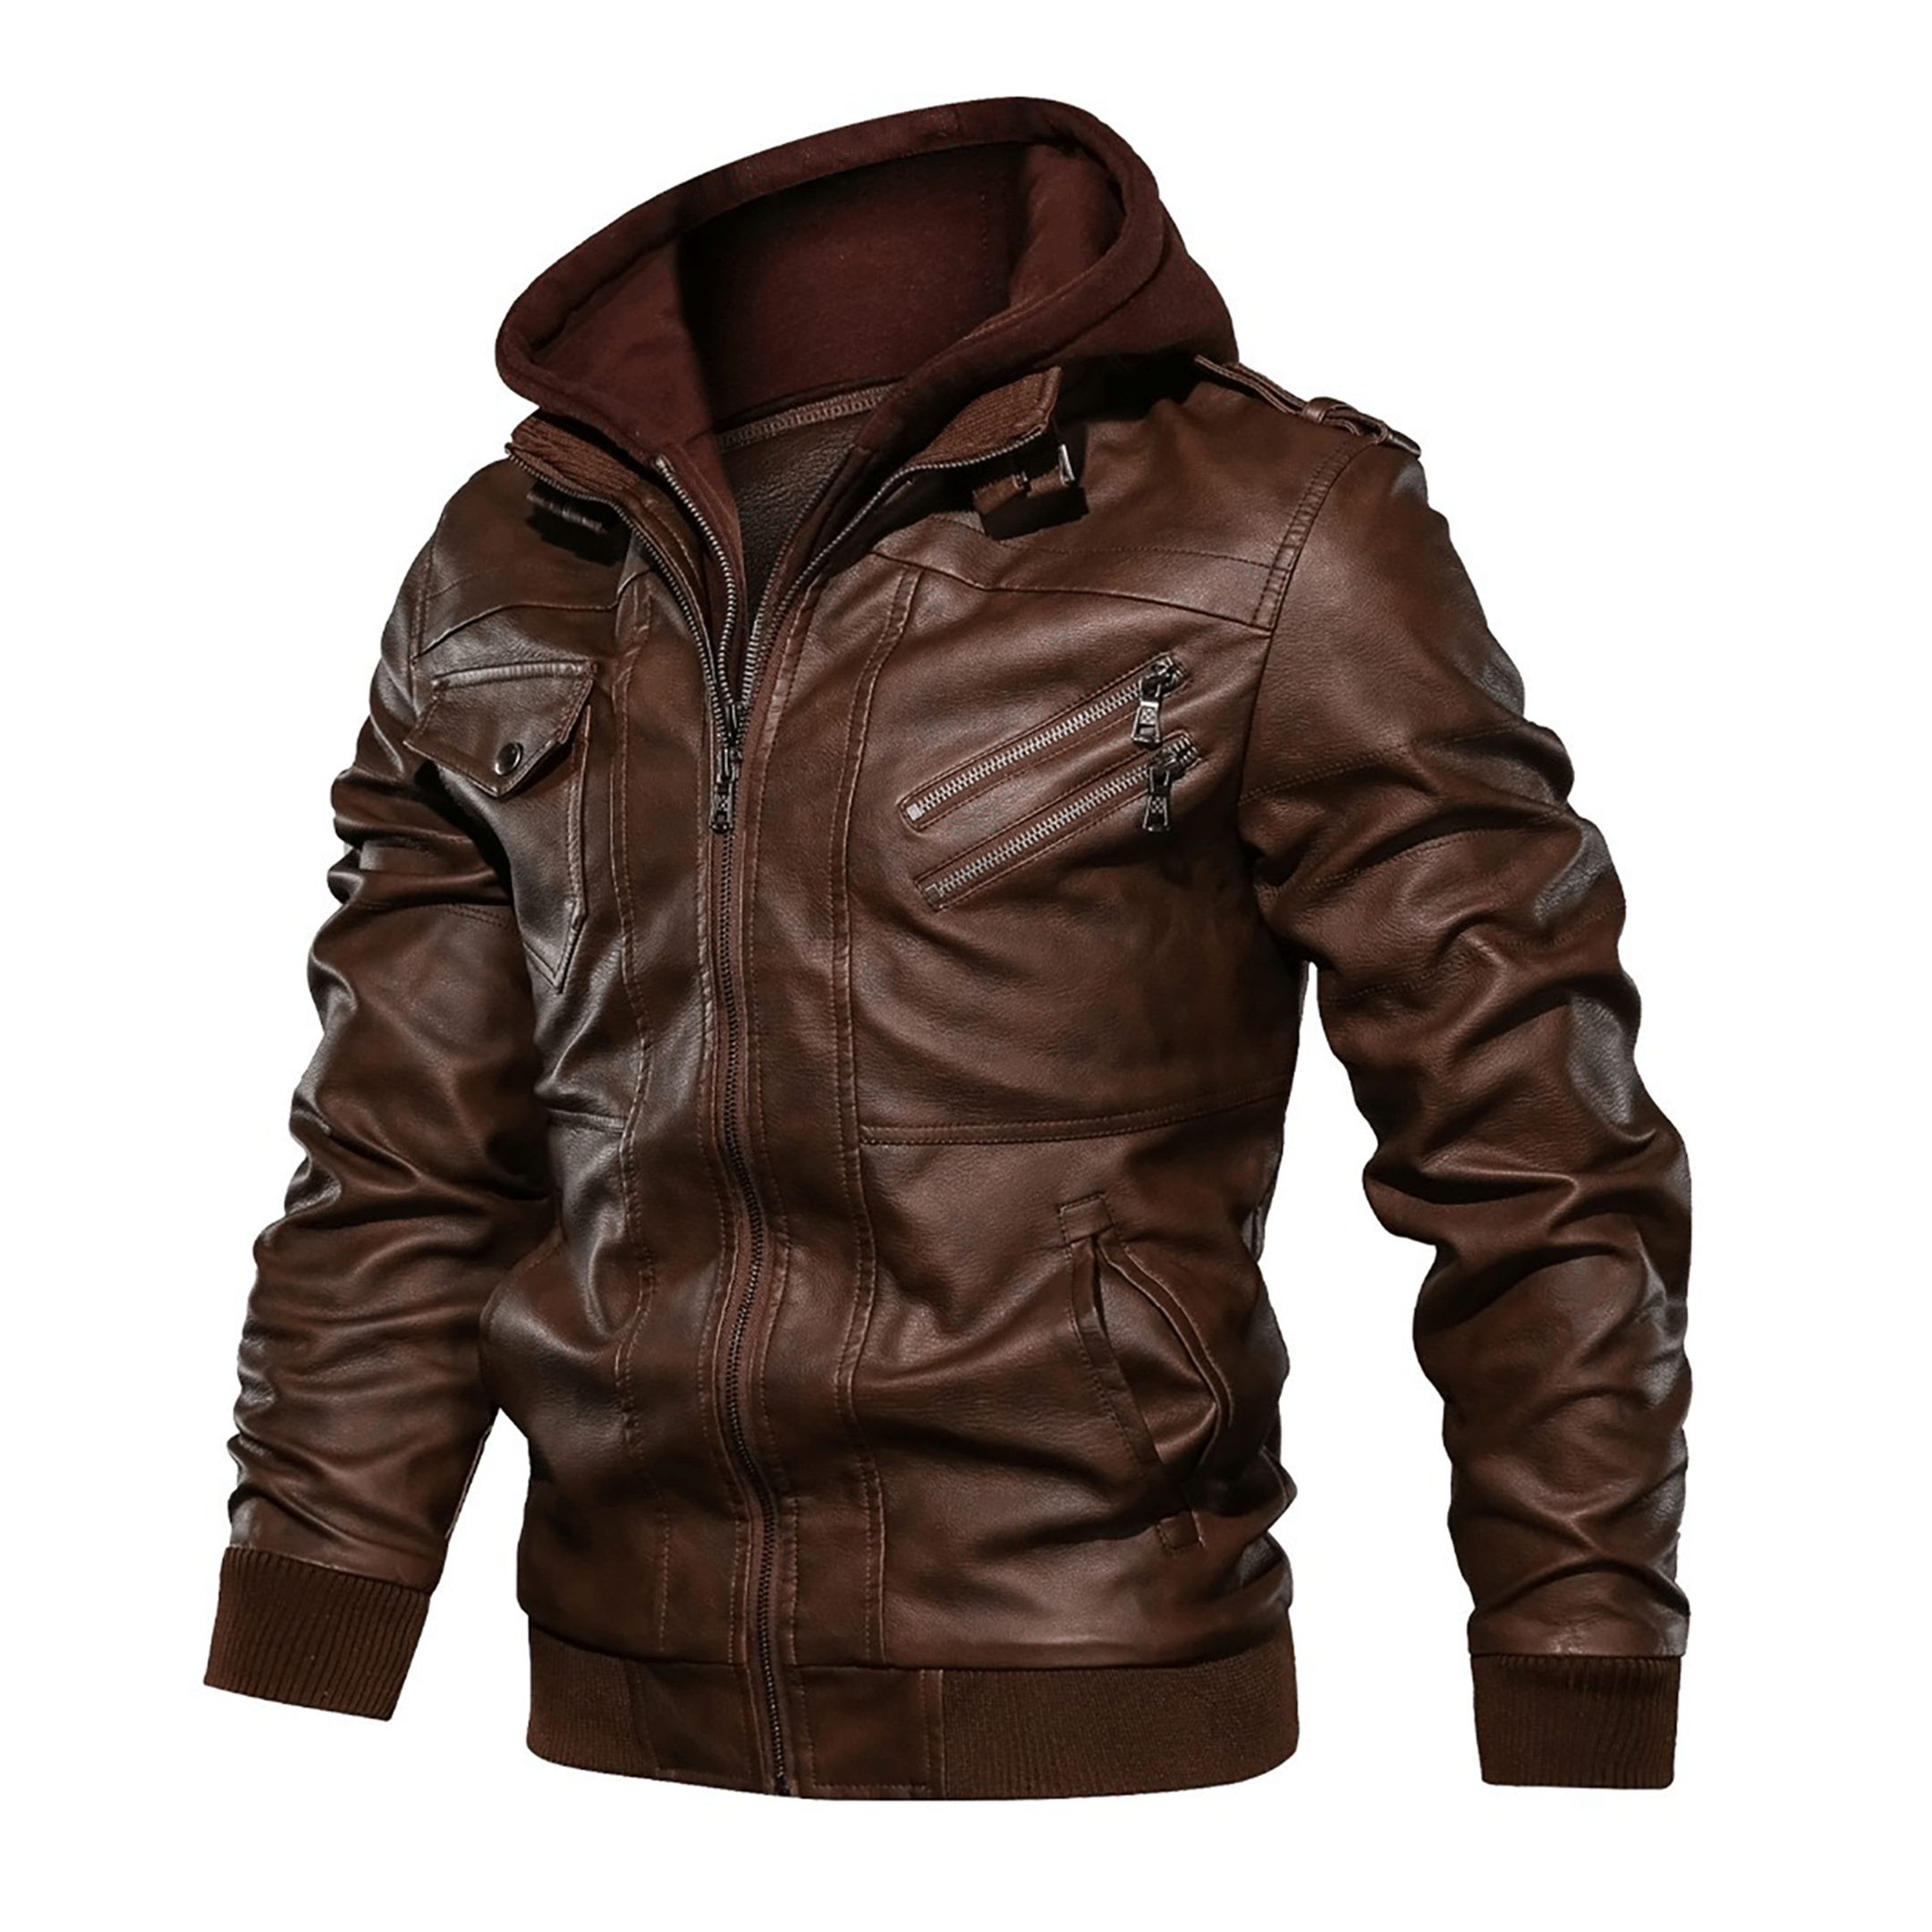 Top leather jackets and latest products 233